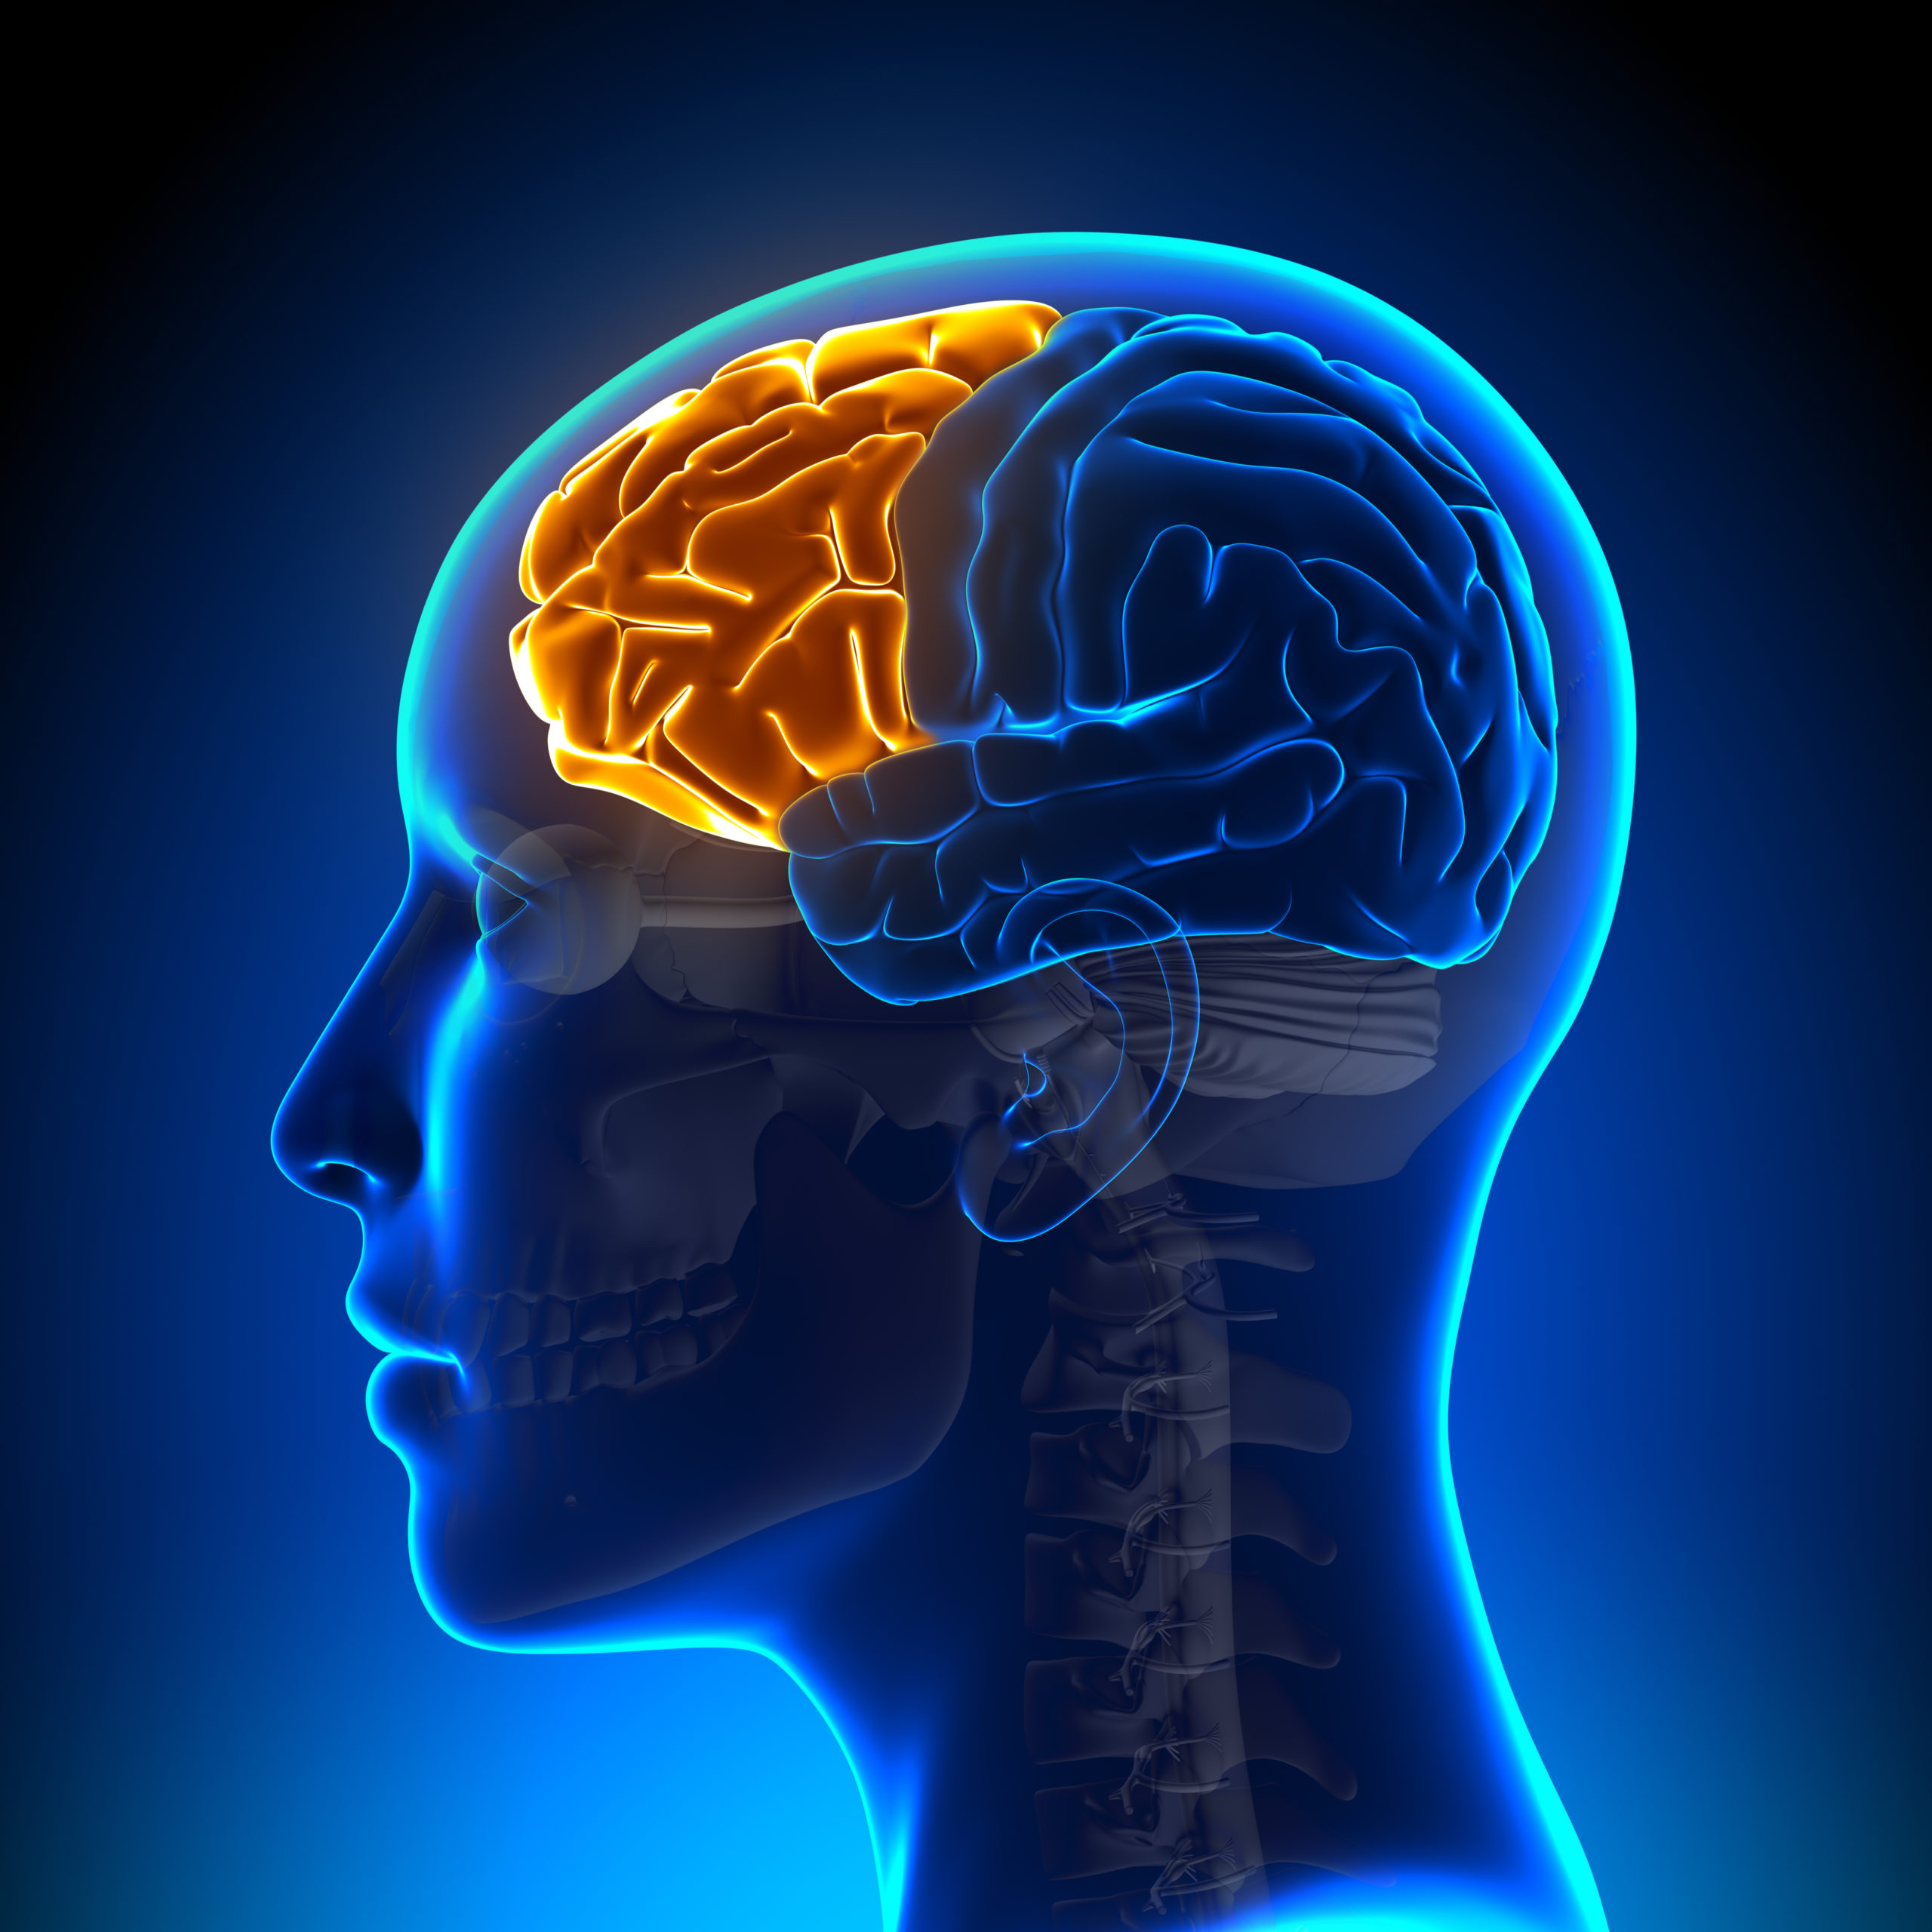 Which Brain Function Might Be Directly Affected By An Injury To The Frontal Lobe?